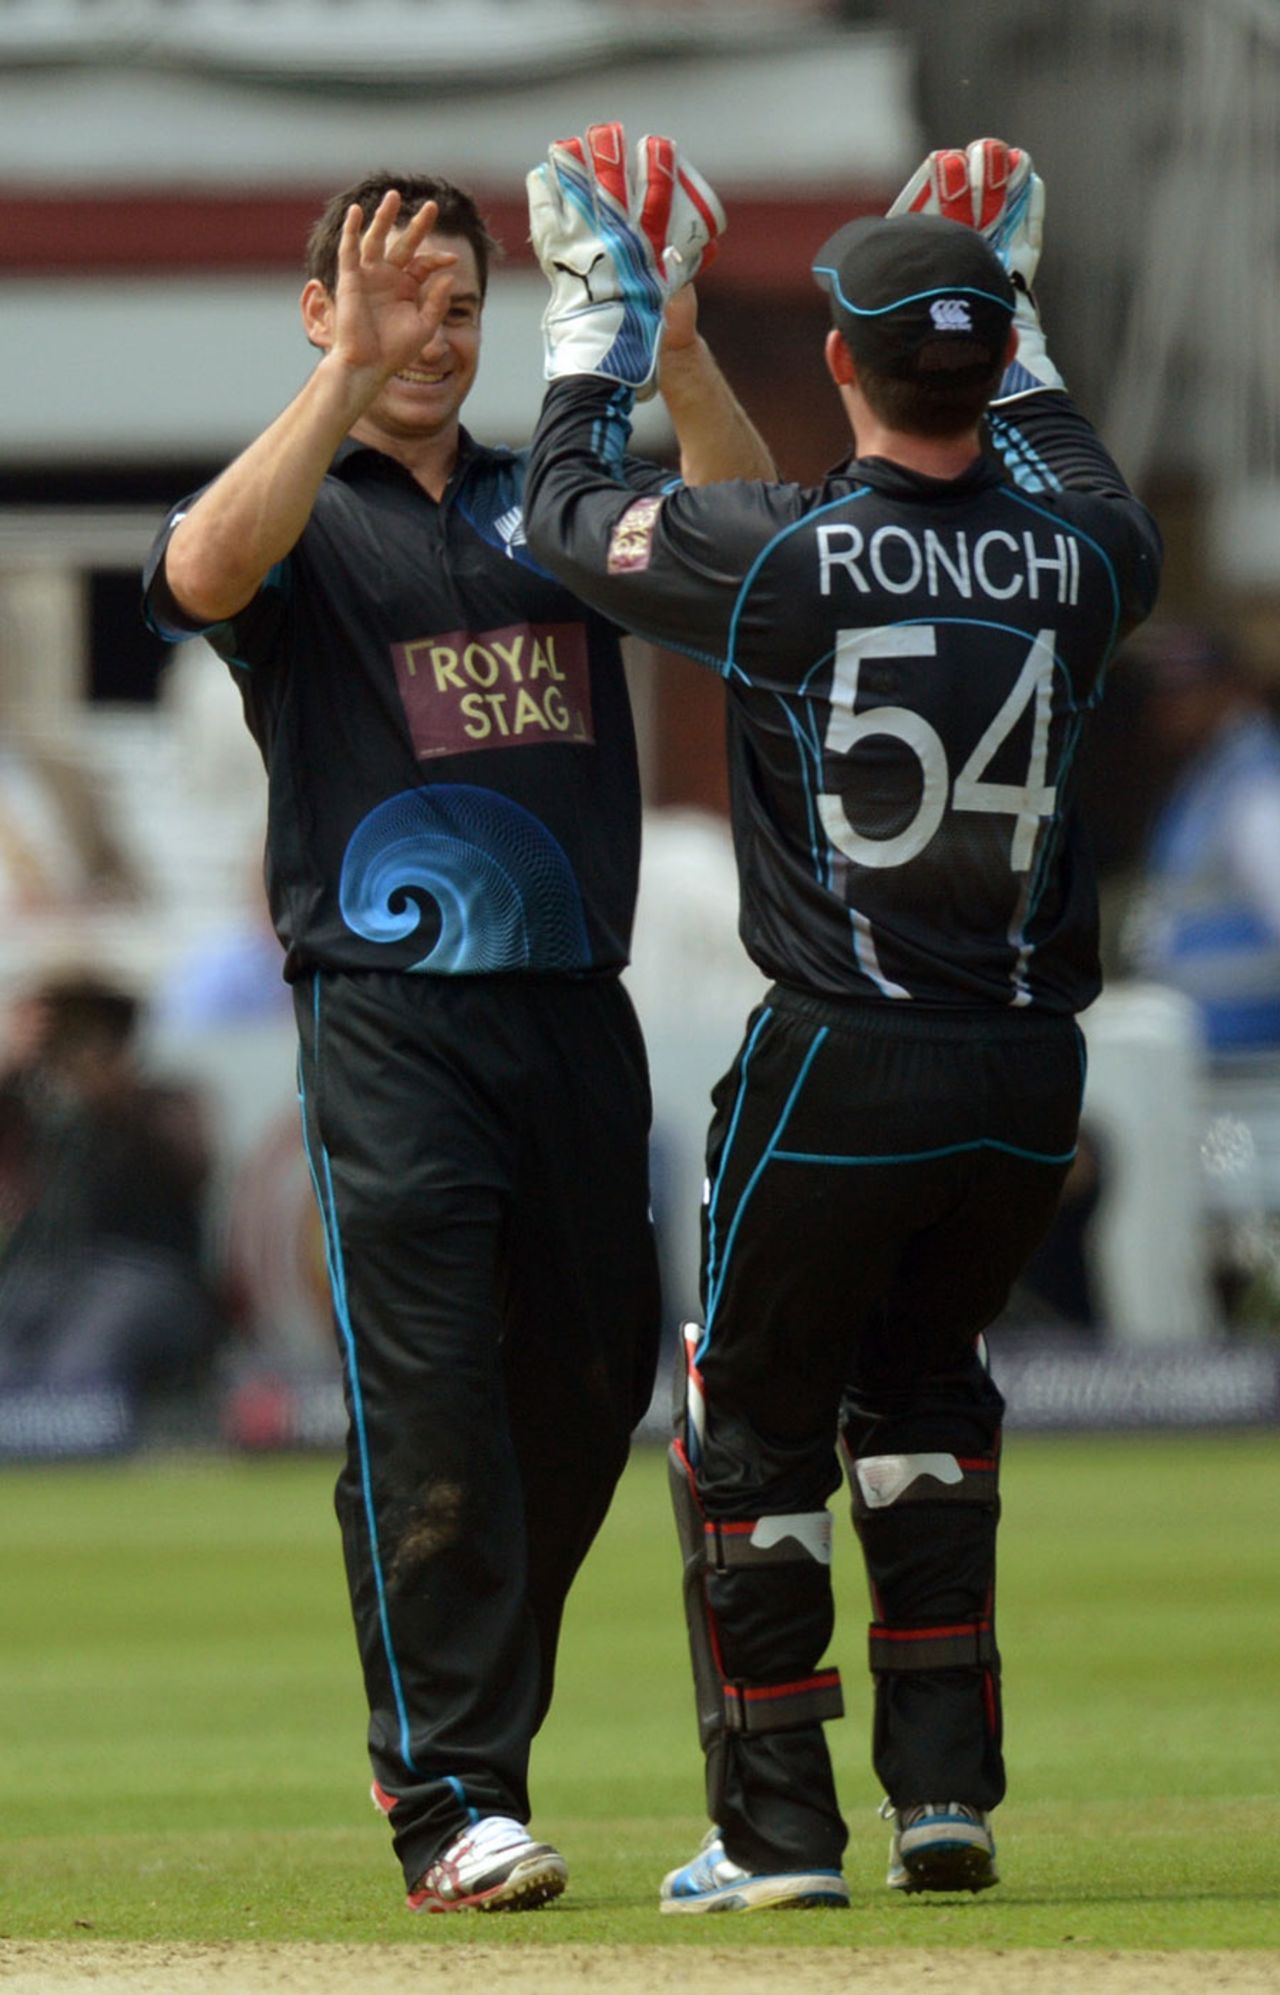 Nathan McCullum bowled a tight spell and took two wickets, England v New Zealand, 1st ODI, Lord's, May 31, 2013